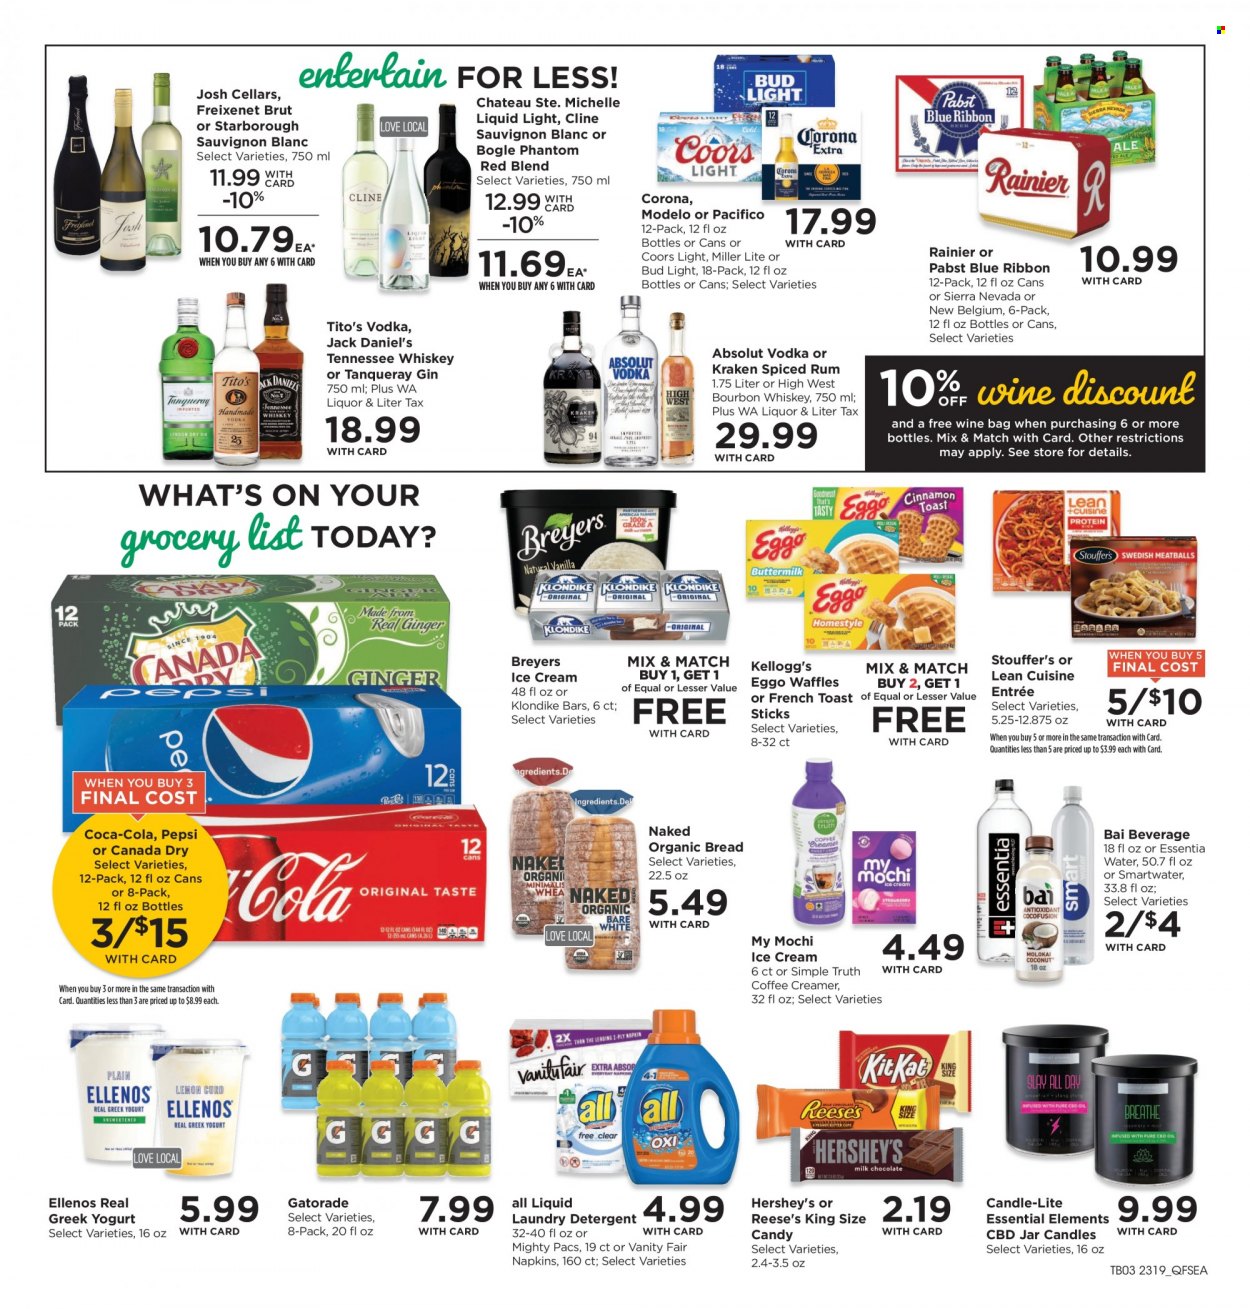 thumbnail - QFC Flyer - 06/07/2023 - 06/13/2023 - Sales products - bread, waffles, Jack Daniel's, Lean Cuisine, ready meal, greek yoghurt, creamer, ice cream, Reese's, Hershey's, Stouffer's, Kellogg's, Candy, Canada Dry, Coca-Cola, Pepsi, soft drink, Bai, Gatorade, Smartwater, water, white wine, wine, alcohol, Sauvignon Blanc, Bogle, bourbon, gin, rum, spiced rum, Tennessee Whiskey, vodka, whiskey, Absolut, bourbon whiskey, whisky, beer, Bud Light, Corona Extra, Modelo, Pabst Blue Ribbon, Pabst, napkins, detergent, laundry detergent, Brut, candle, electrolyte drink, Miller Lite, Coors. Page 5.